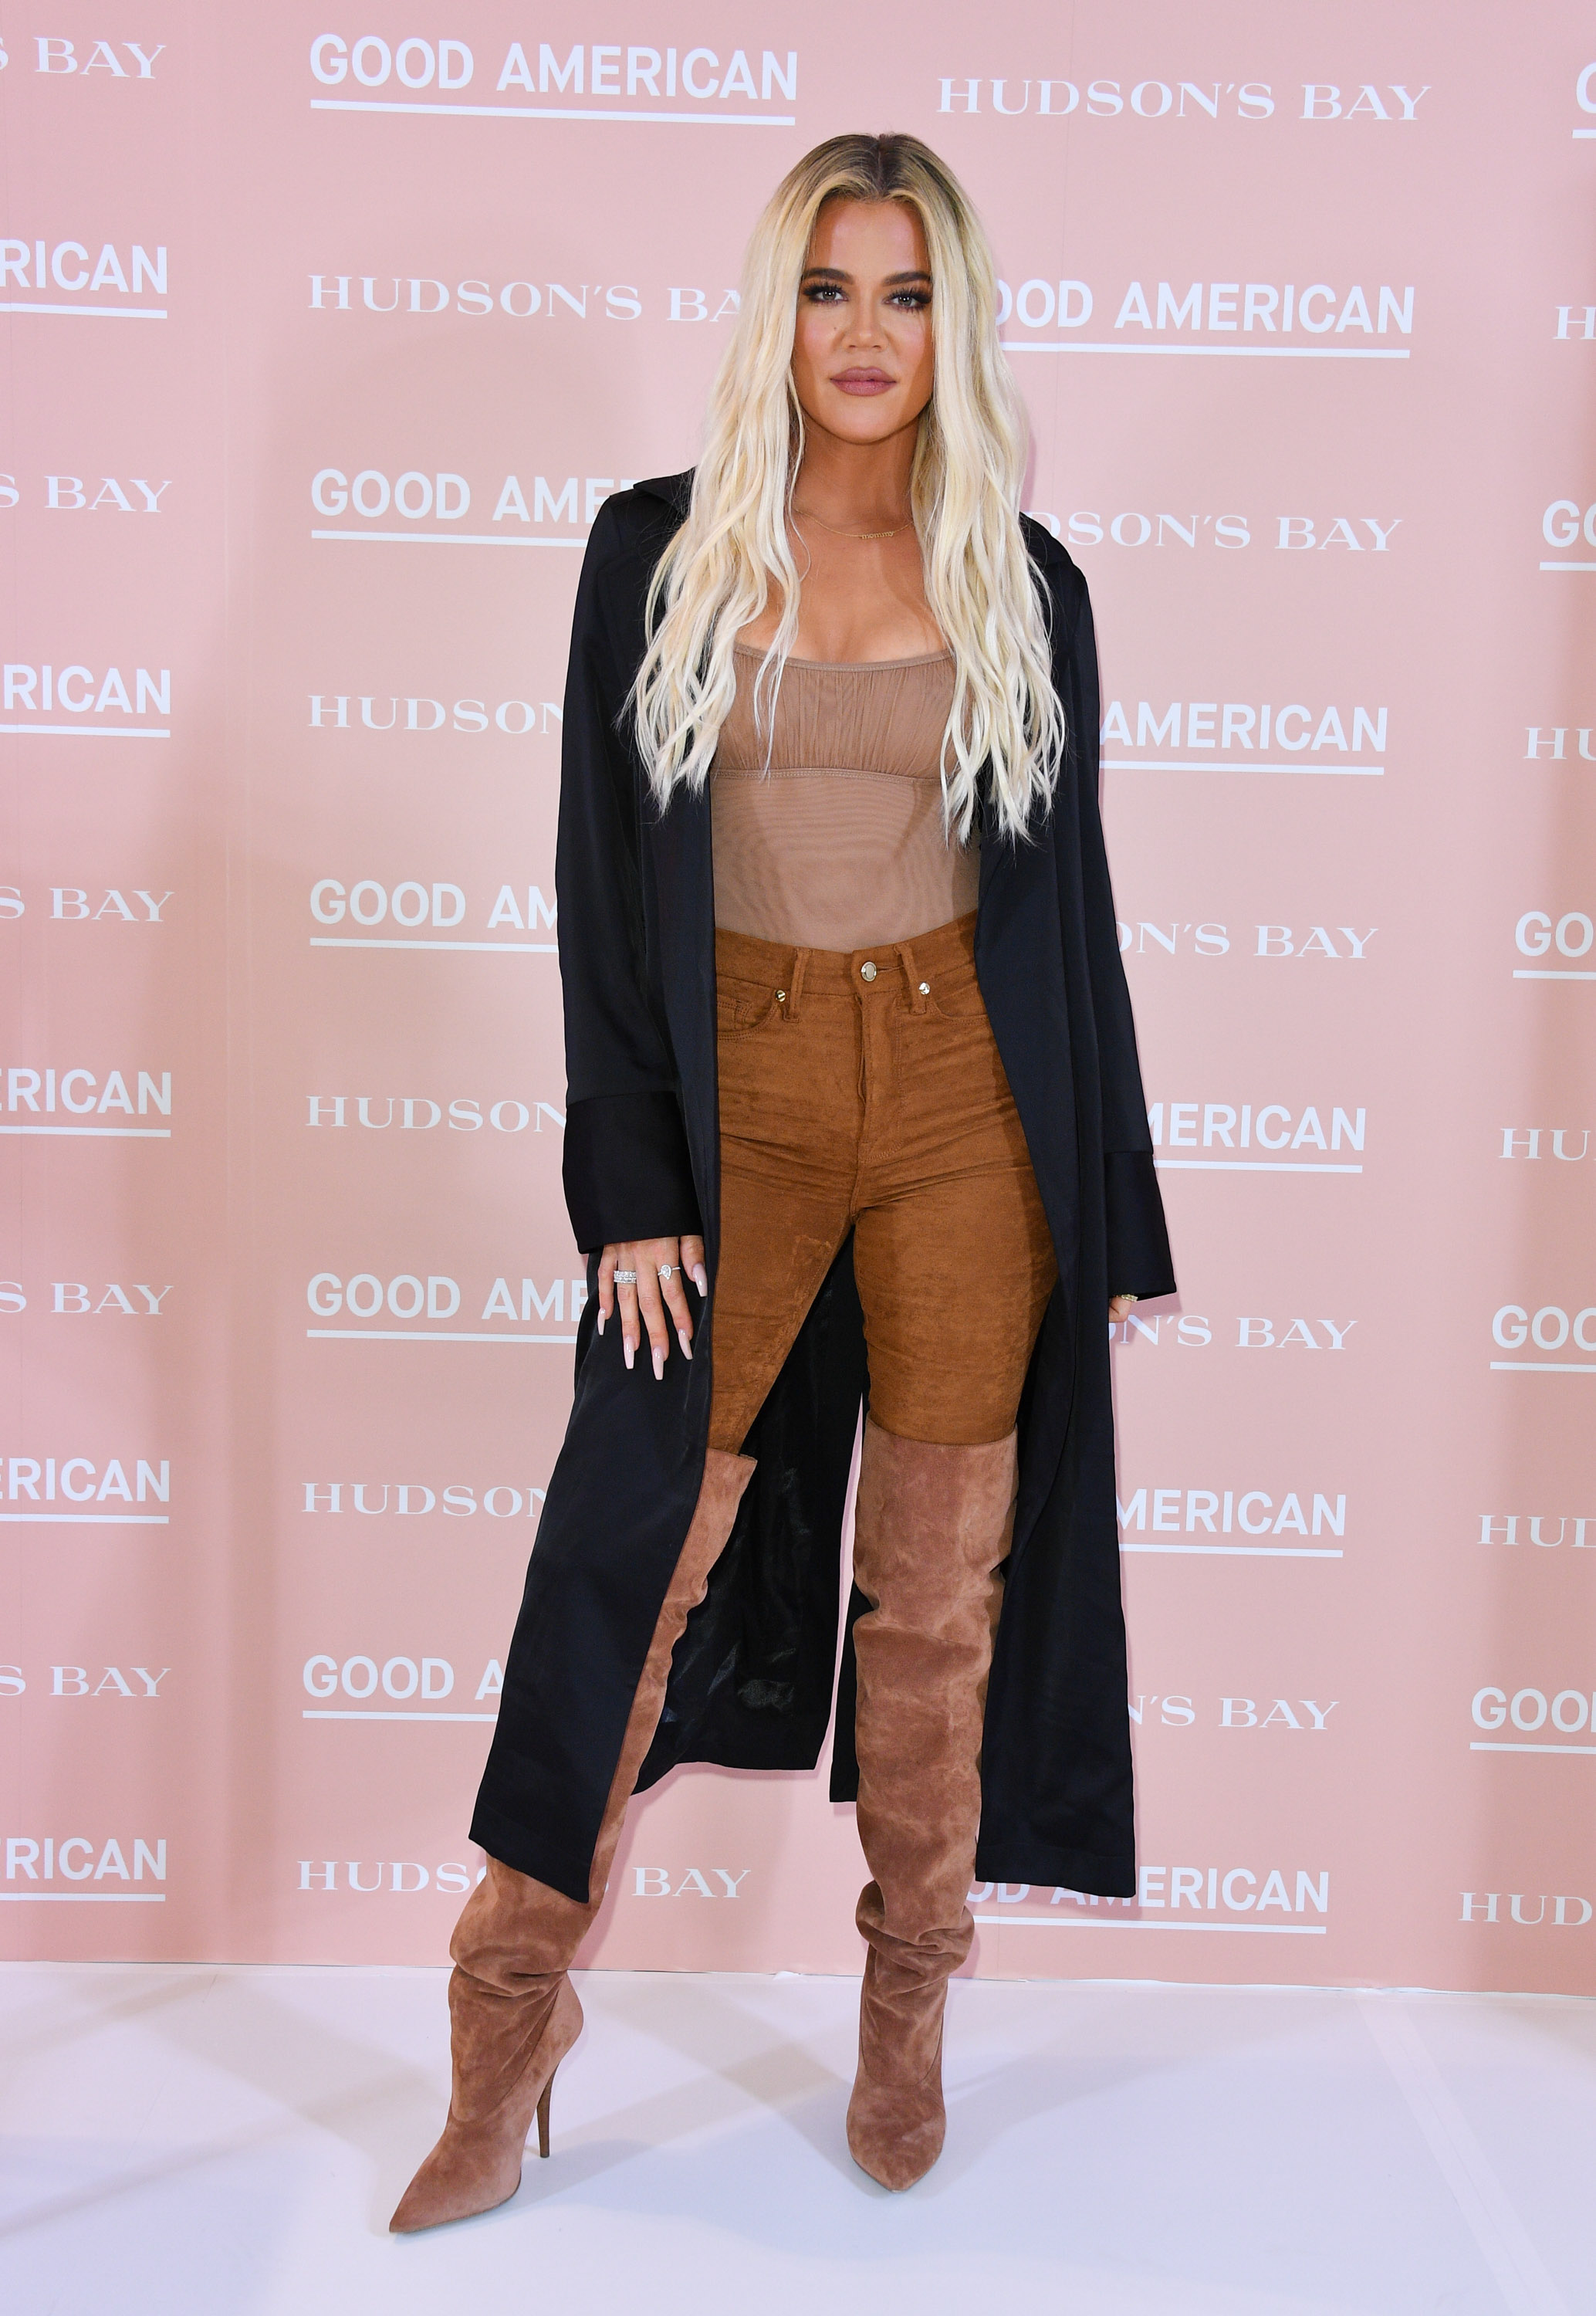 Khloe's Good American clothing brand has the worst engagement numbers from the family's businesses, according to a new analysis